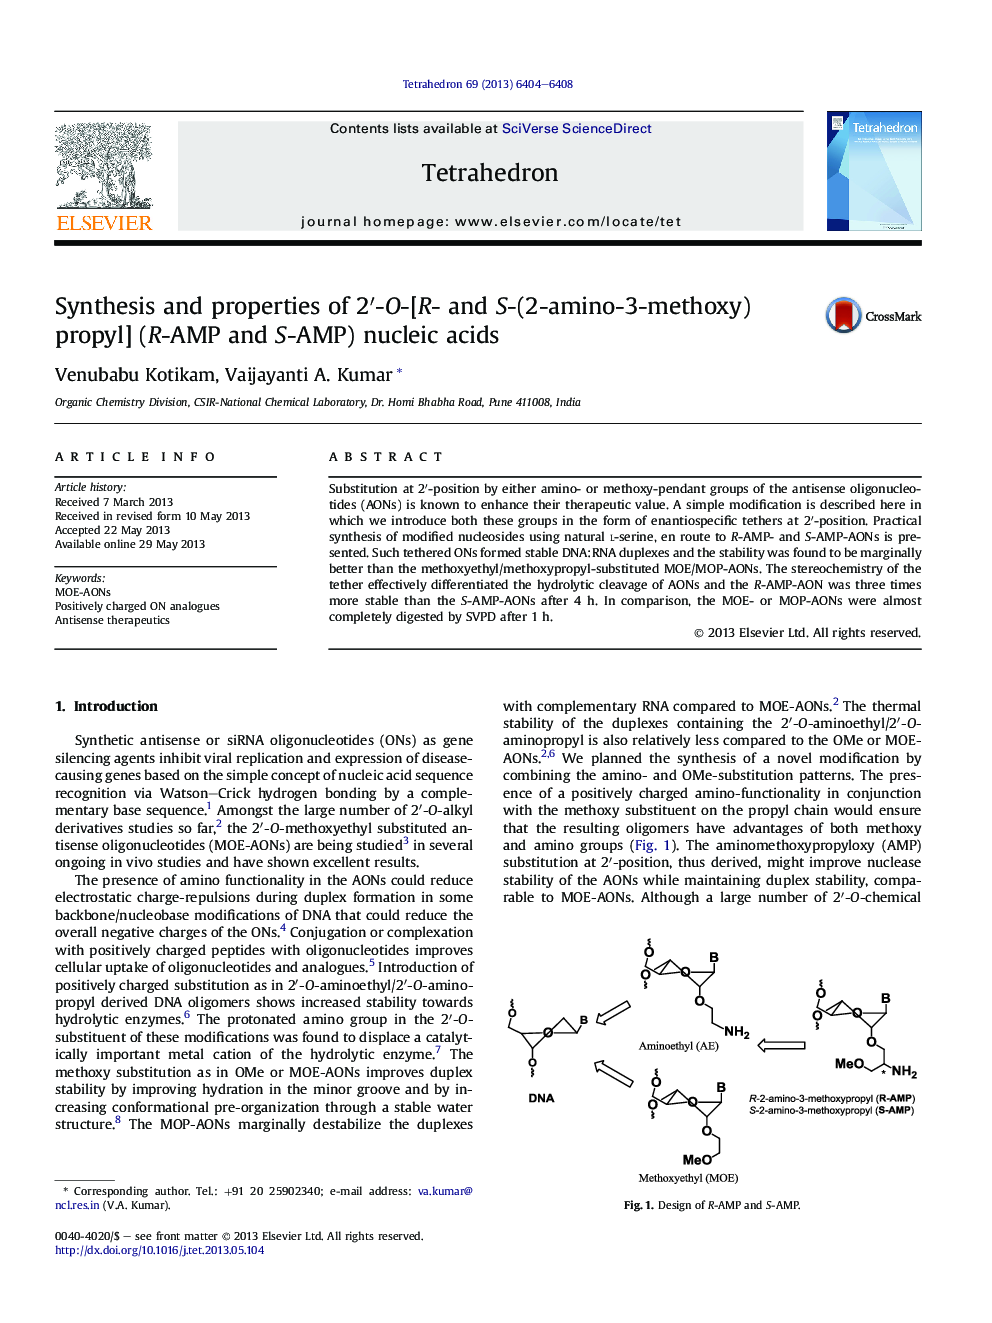 Synthesis and properties of 2â²-O-[R- and S-(2-amino-3-methoxy)propyl] (R-AMP and S-AMP) nucleic acids